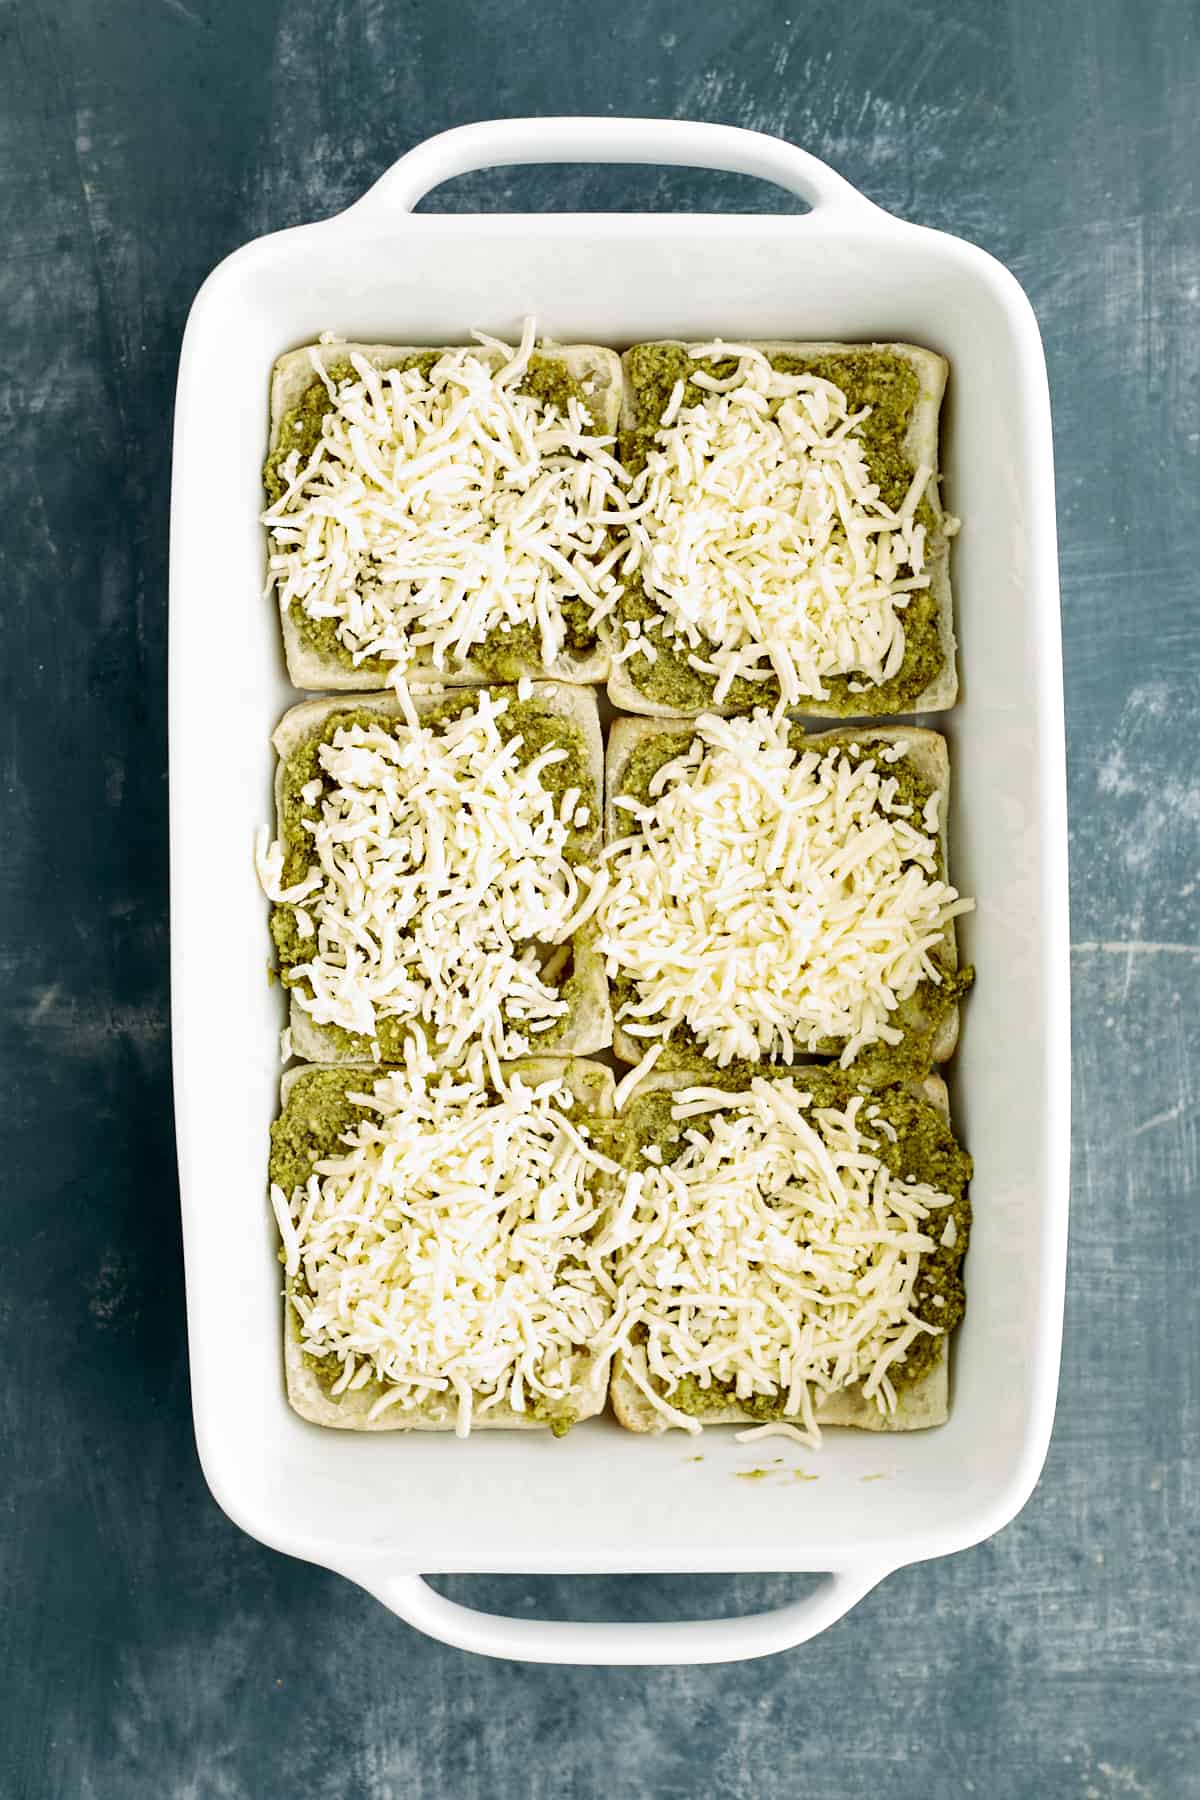 sliced bread in a baking dish topped with pesto and cheese.